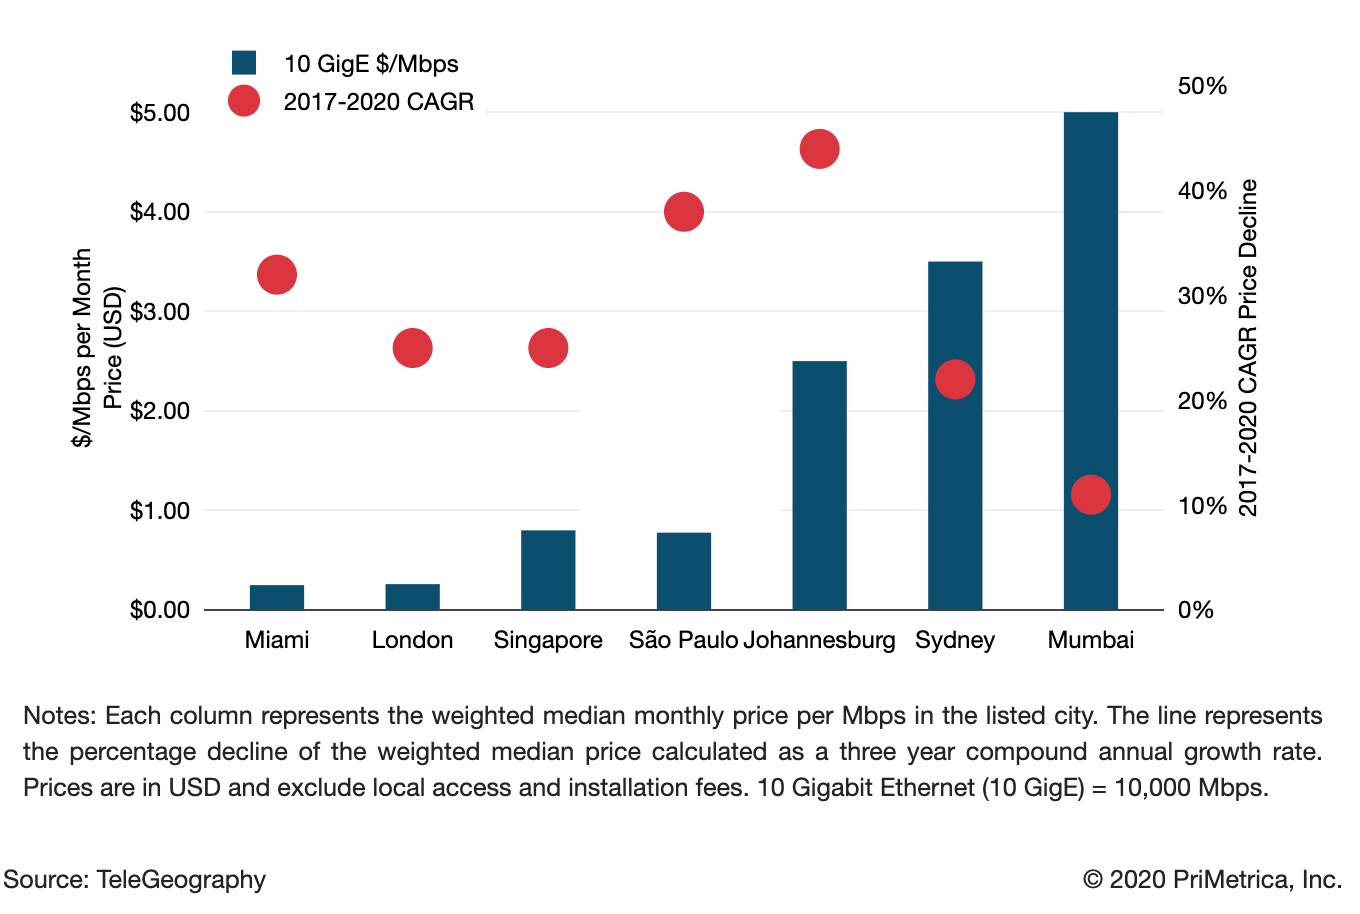 Weighted Median 10 GigE IP Transit Prices & Three Year CAGR Decline in Major Global Cities